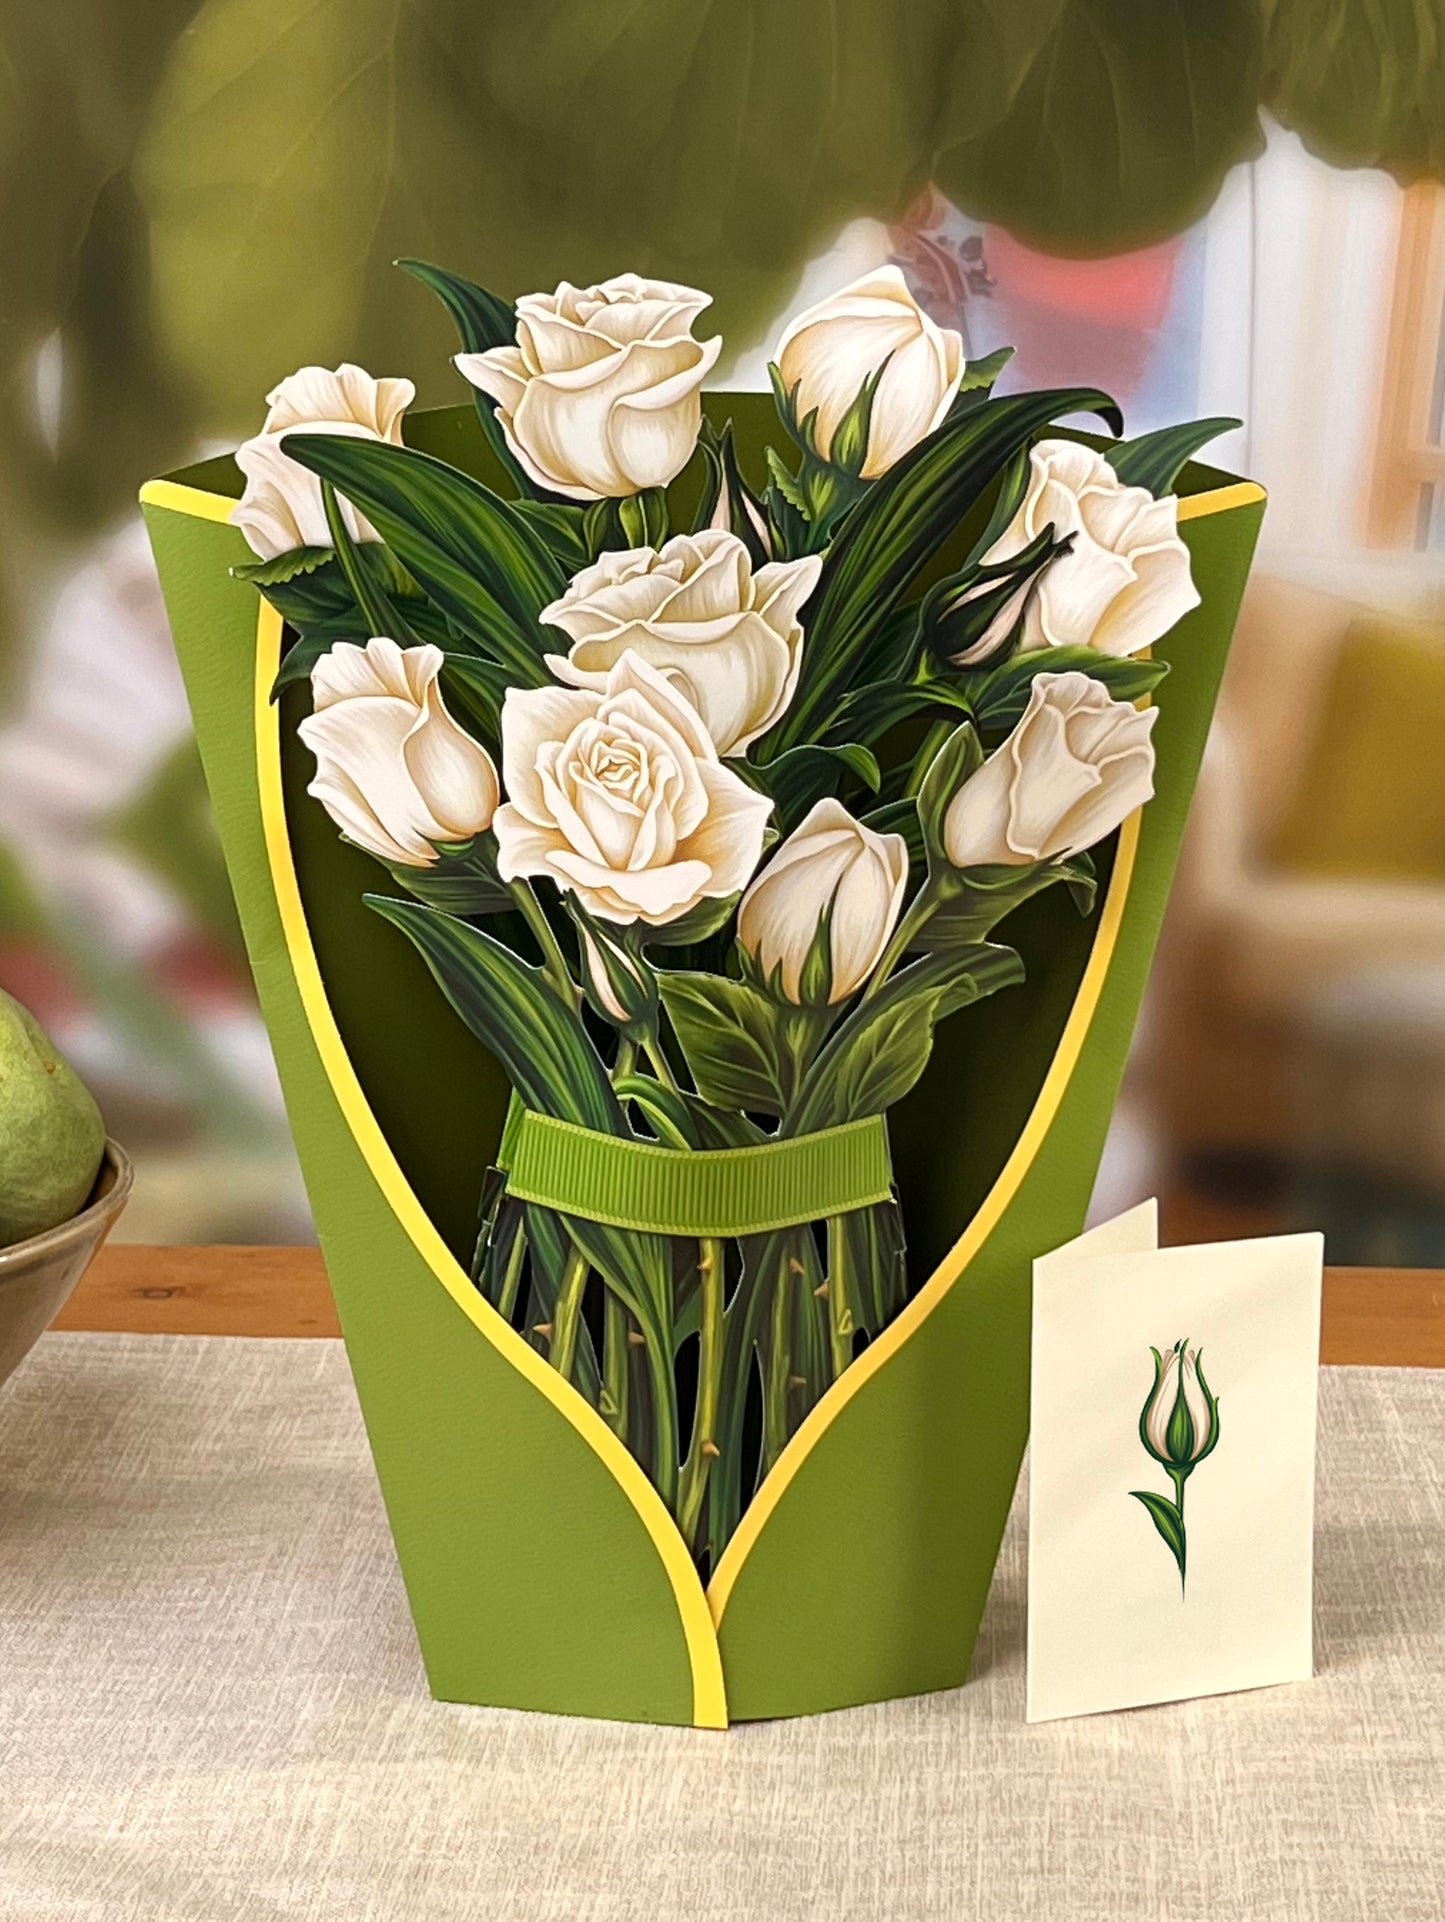 White Roses Pop Up Flower Bouquet